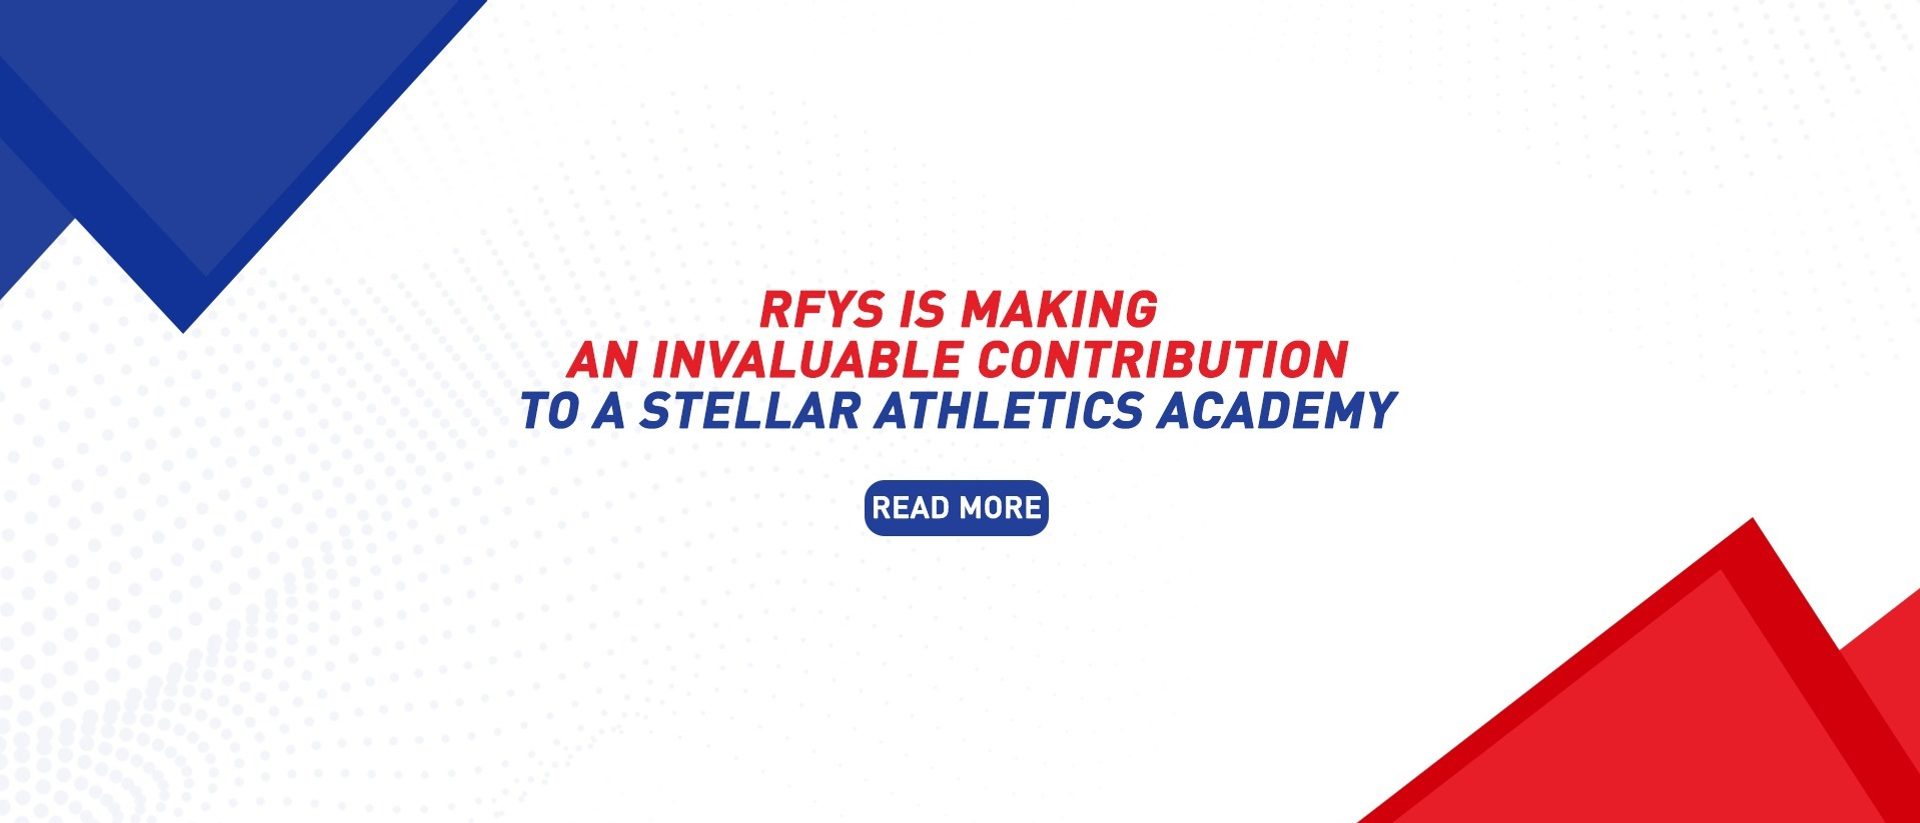 IN TINY PULLURAMPARA, HOW RFYS IS MAKING AN INVALUABLE CONTRIBUTION TO A STELLAR ATHLETICS ACADEMY